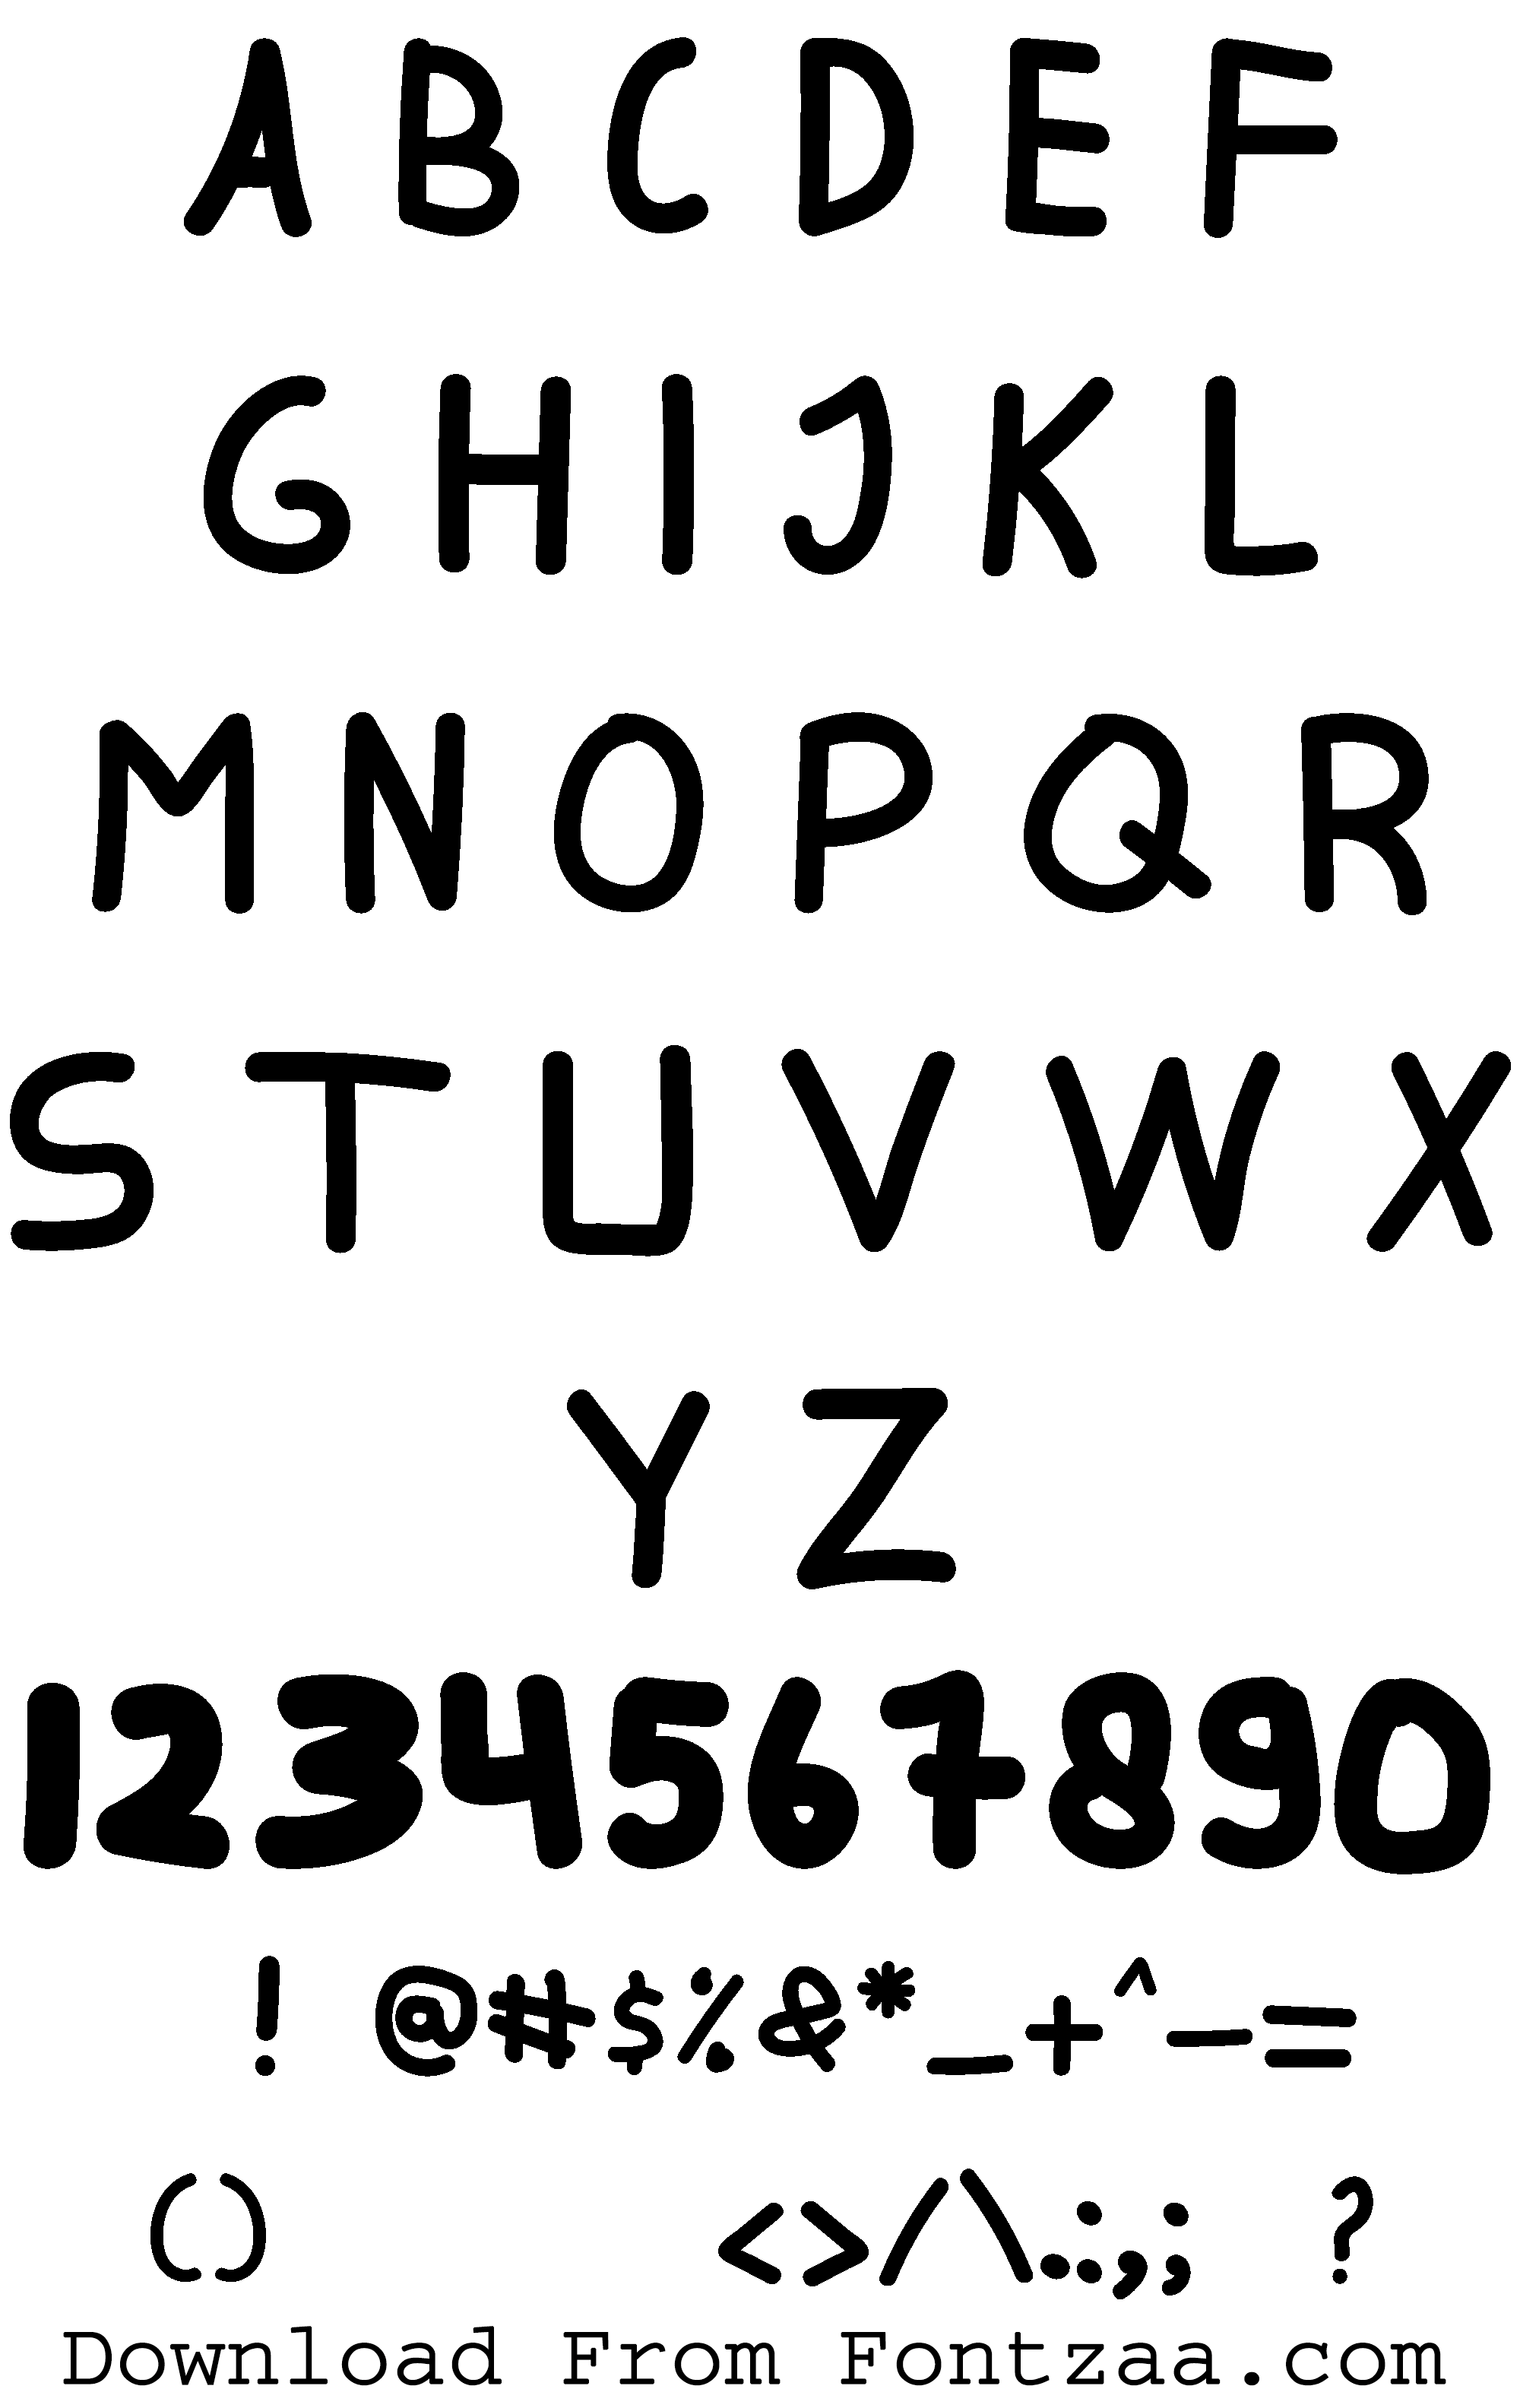 Winnie the Pooh Font - Fontzaa - Exclusive Fonts Library